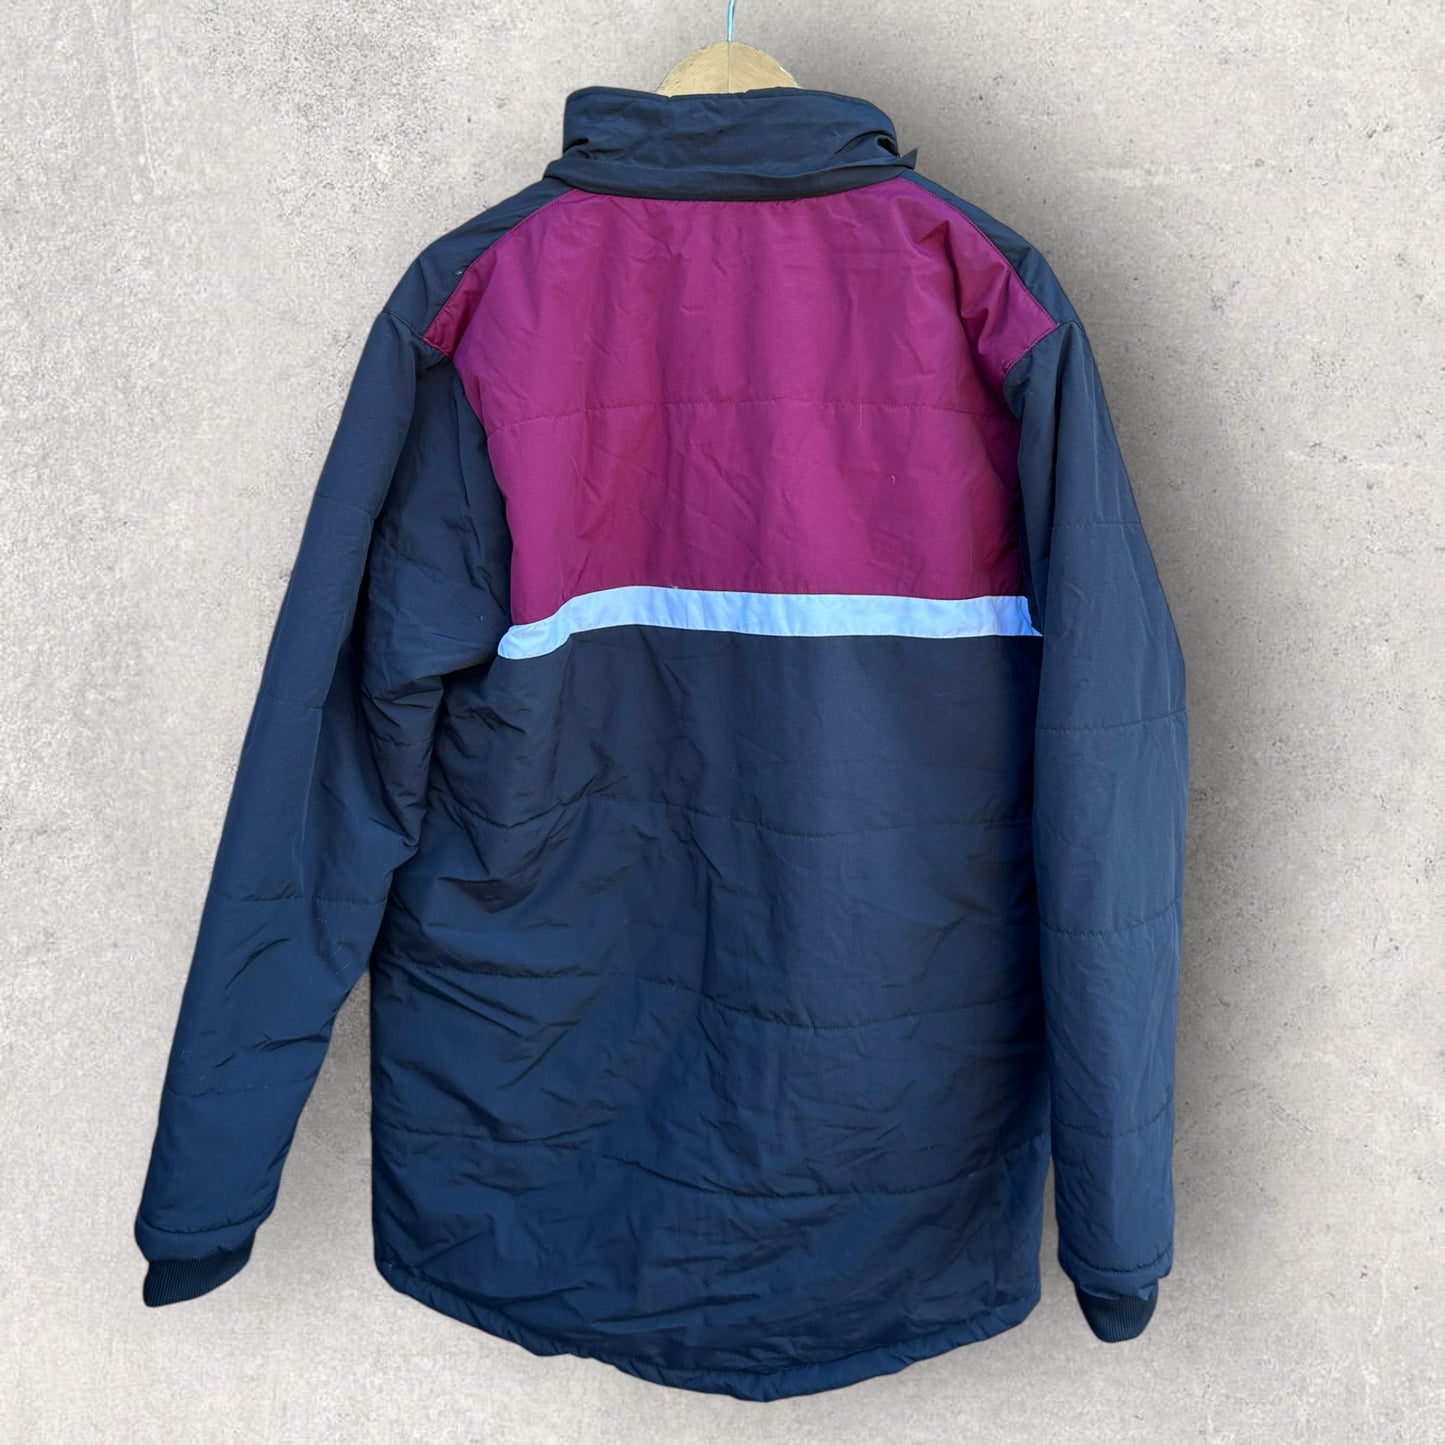 BLACKTOWN WORKERS SEA EAGLES PLAYER WORN BENCH PUFFER JACKET